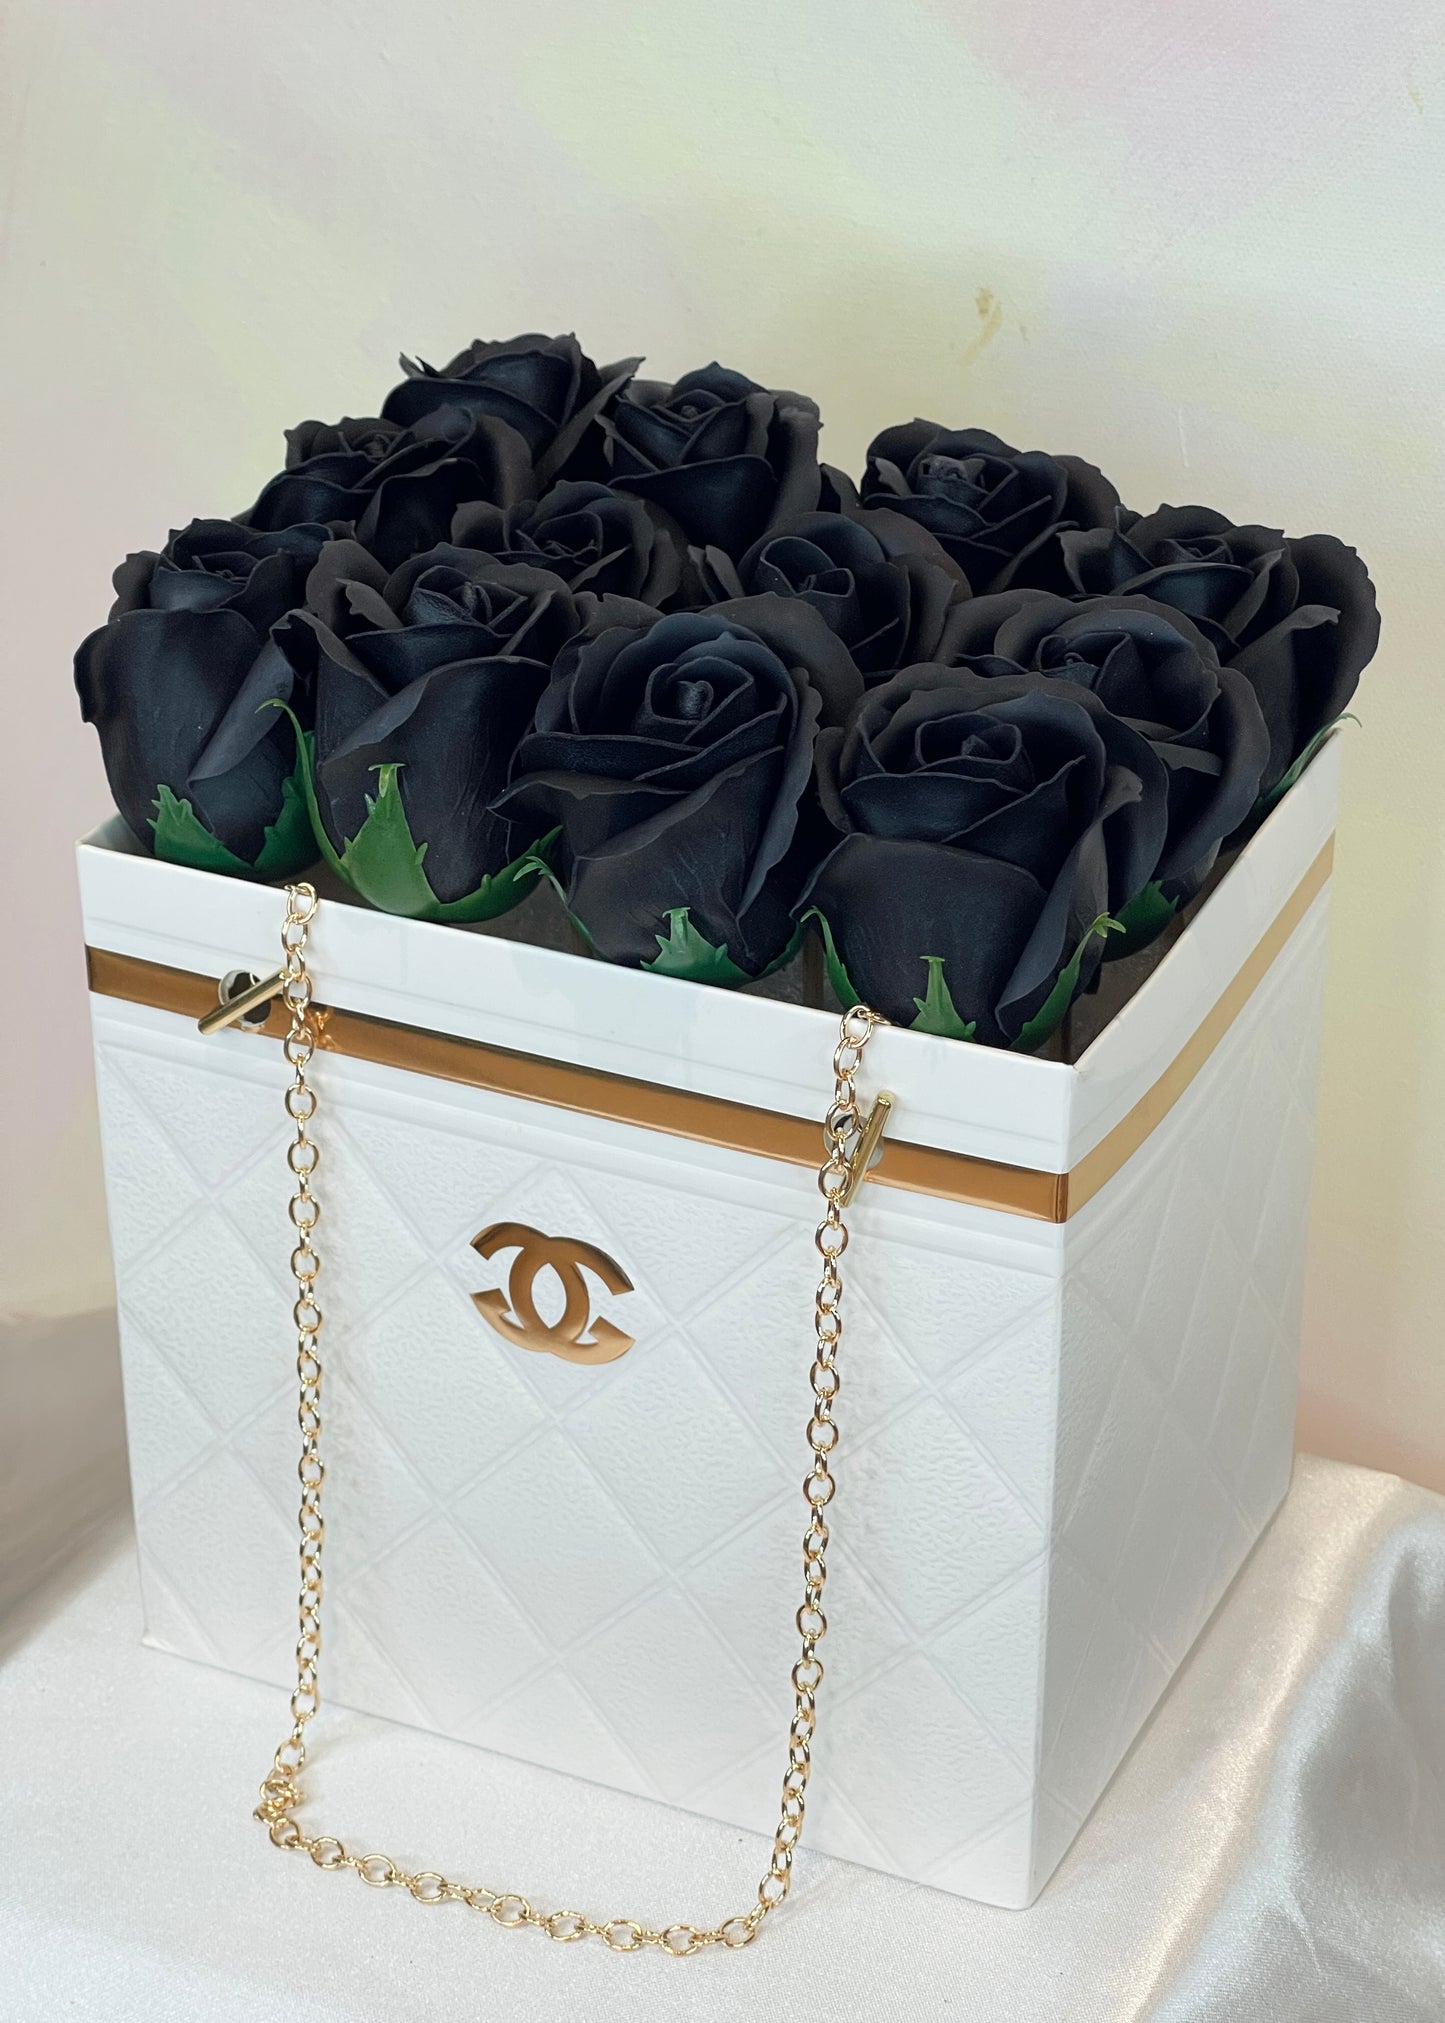 "Channel" Bag of Roses (Soap Roses)